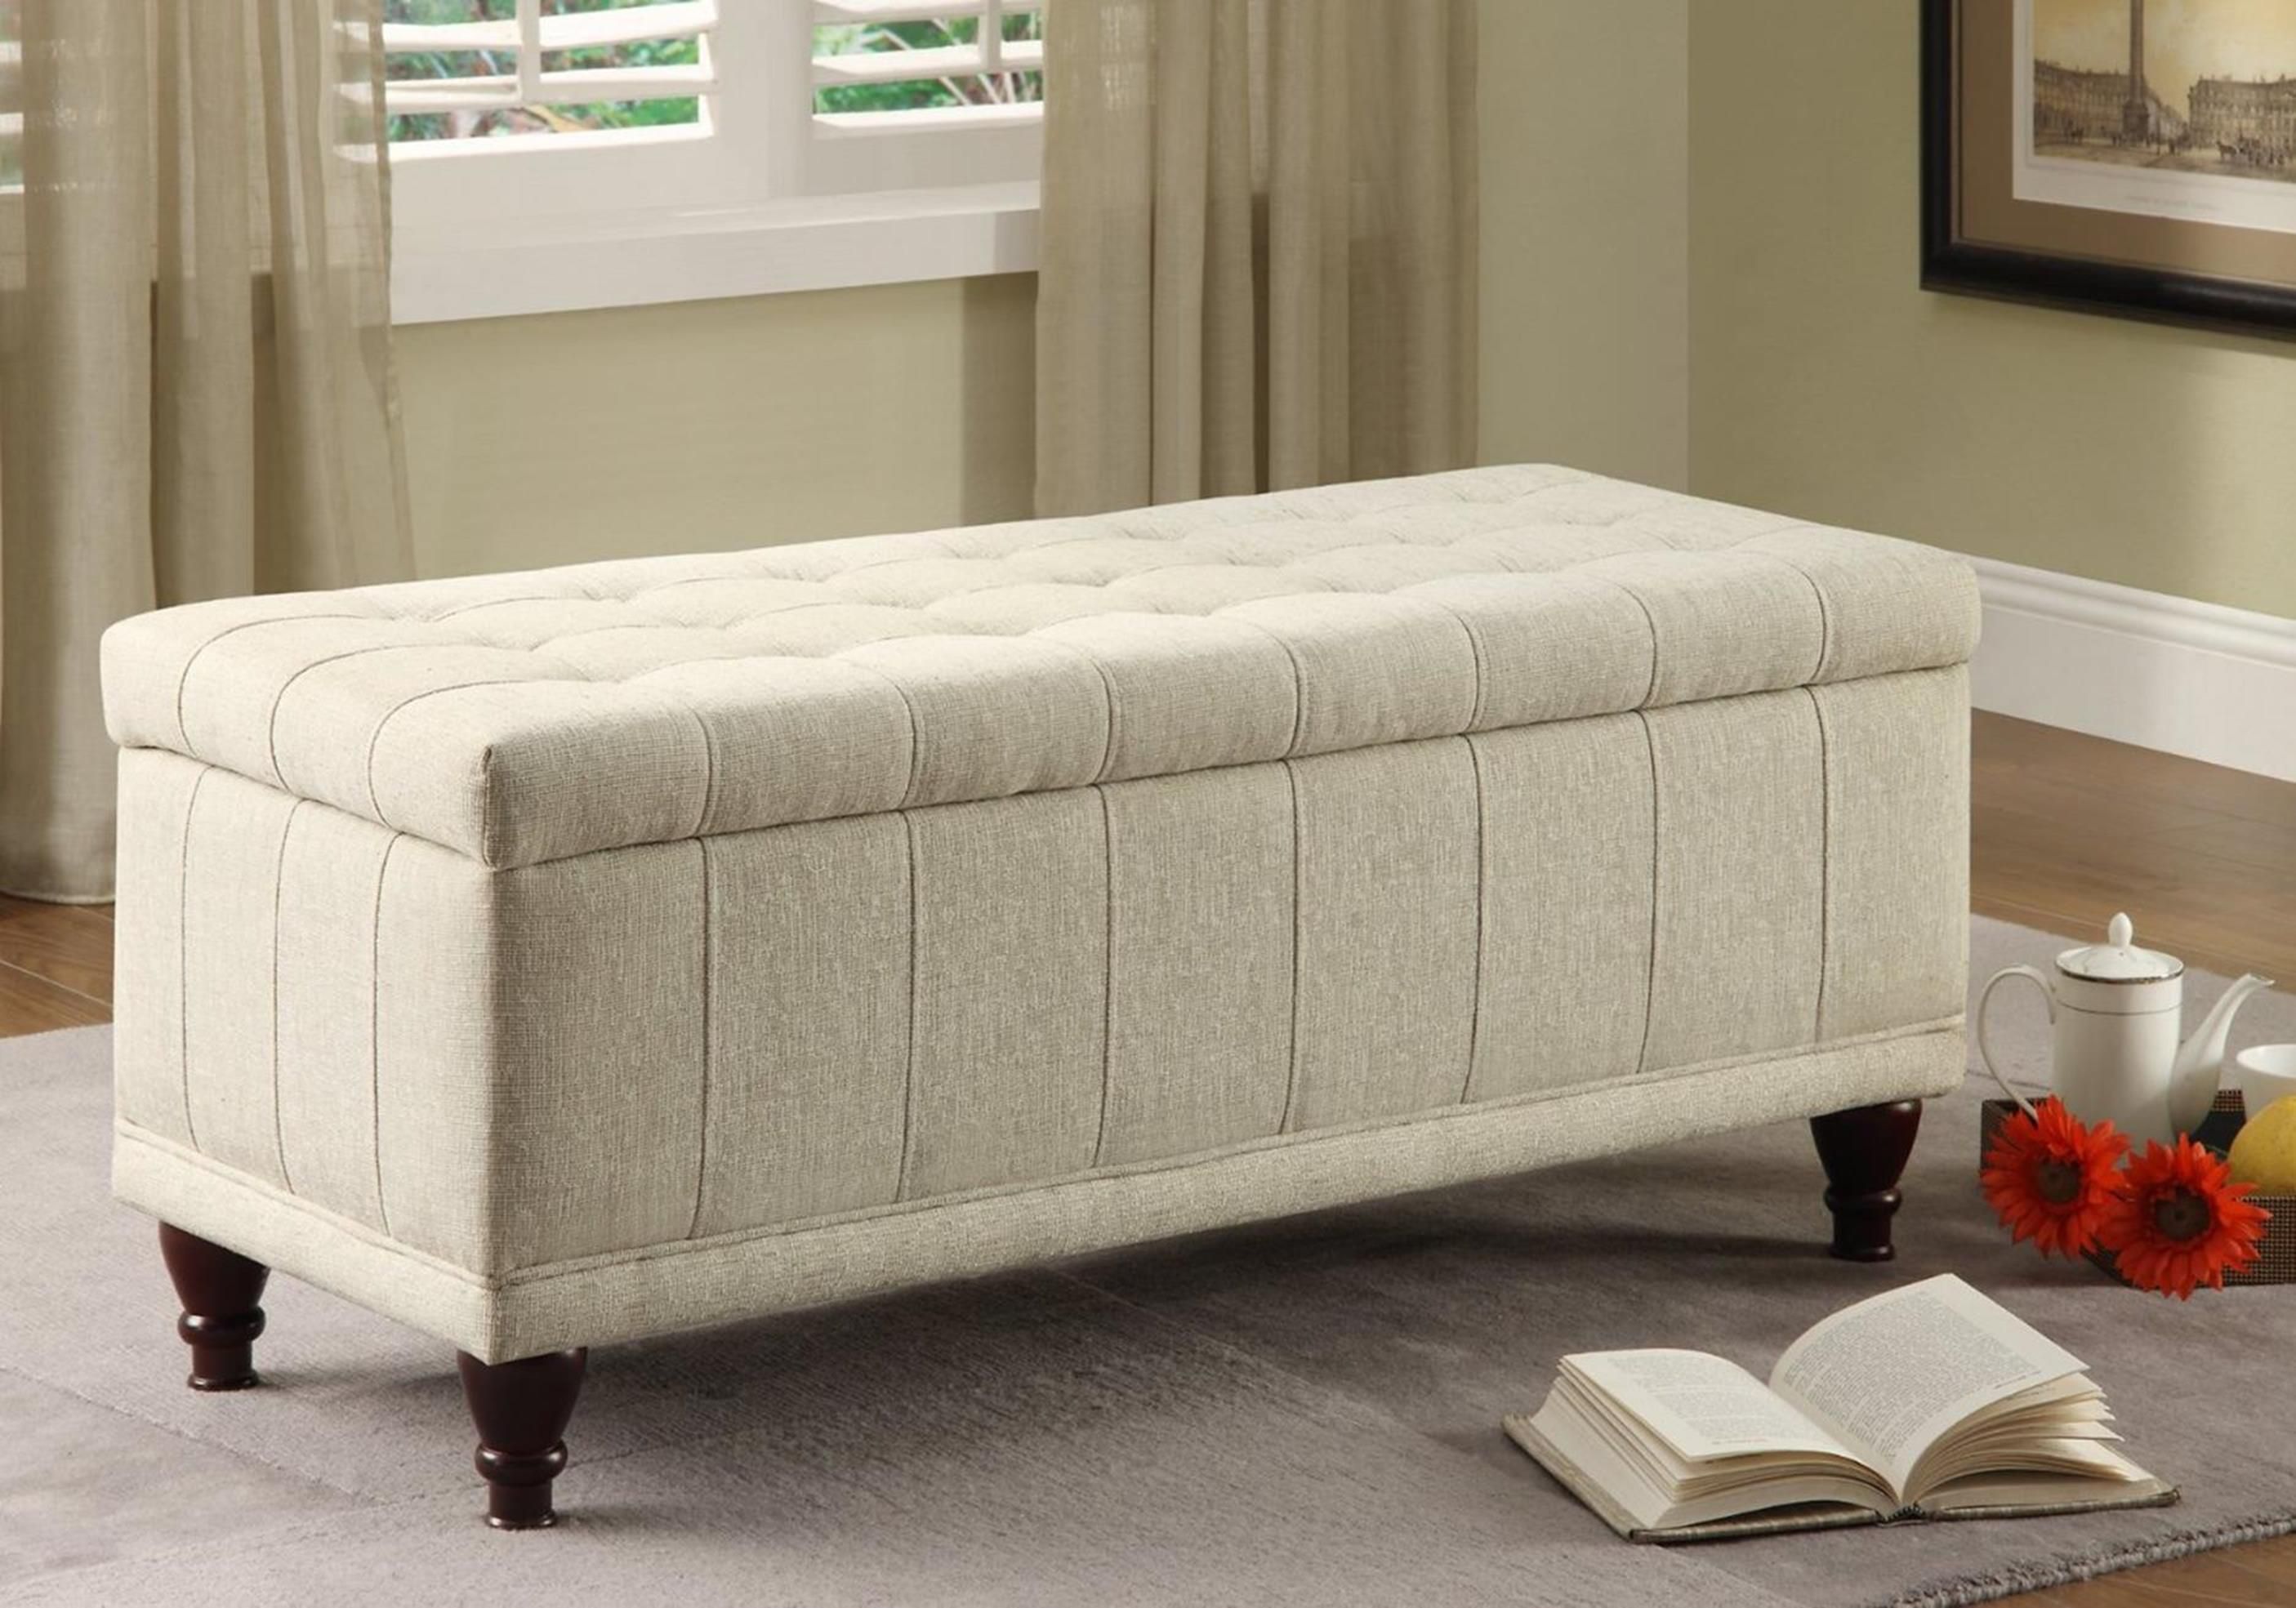 Essential Tips For Choosing The Best Bedroom Storage Bench